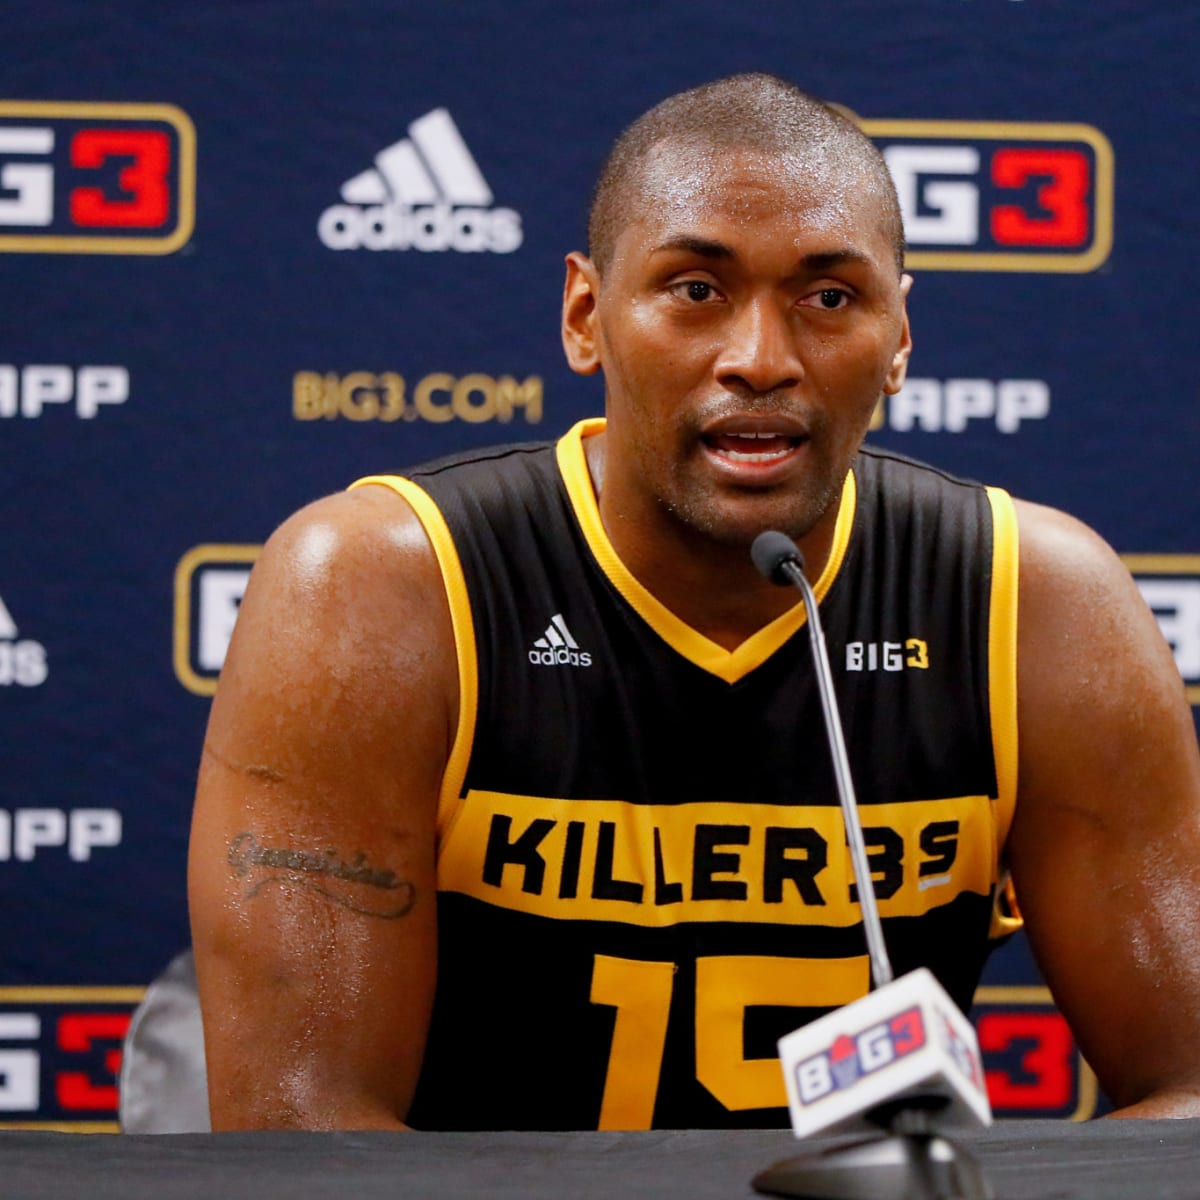 Artest's name change to Metta World Peace approved - The San Diego